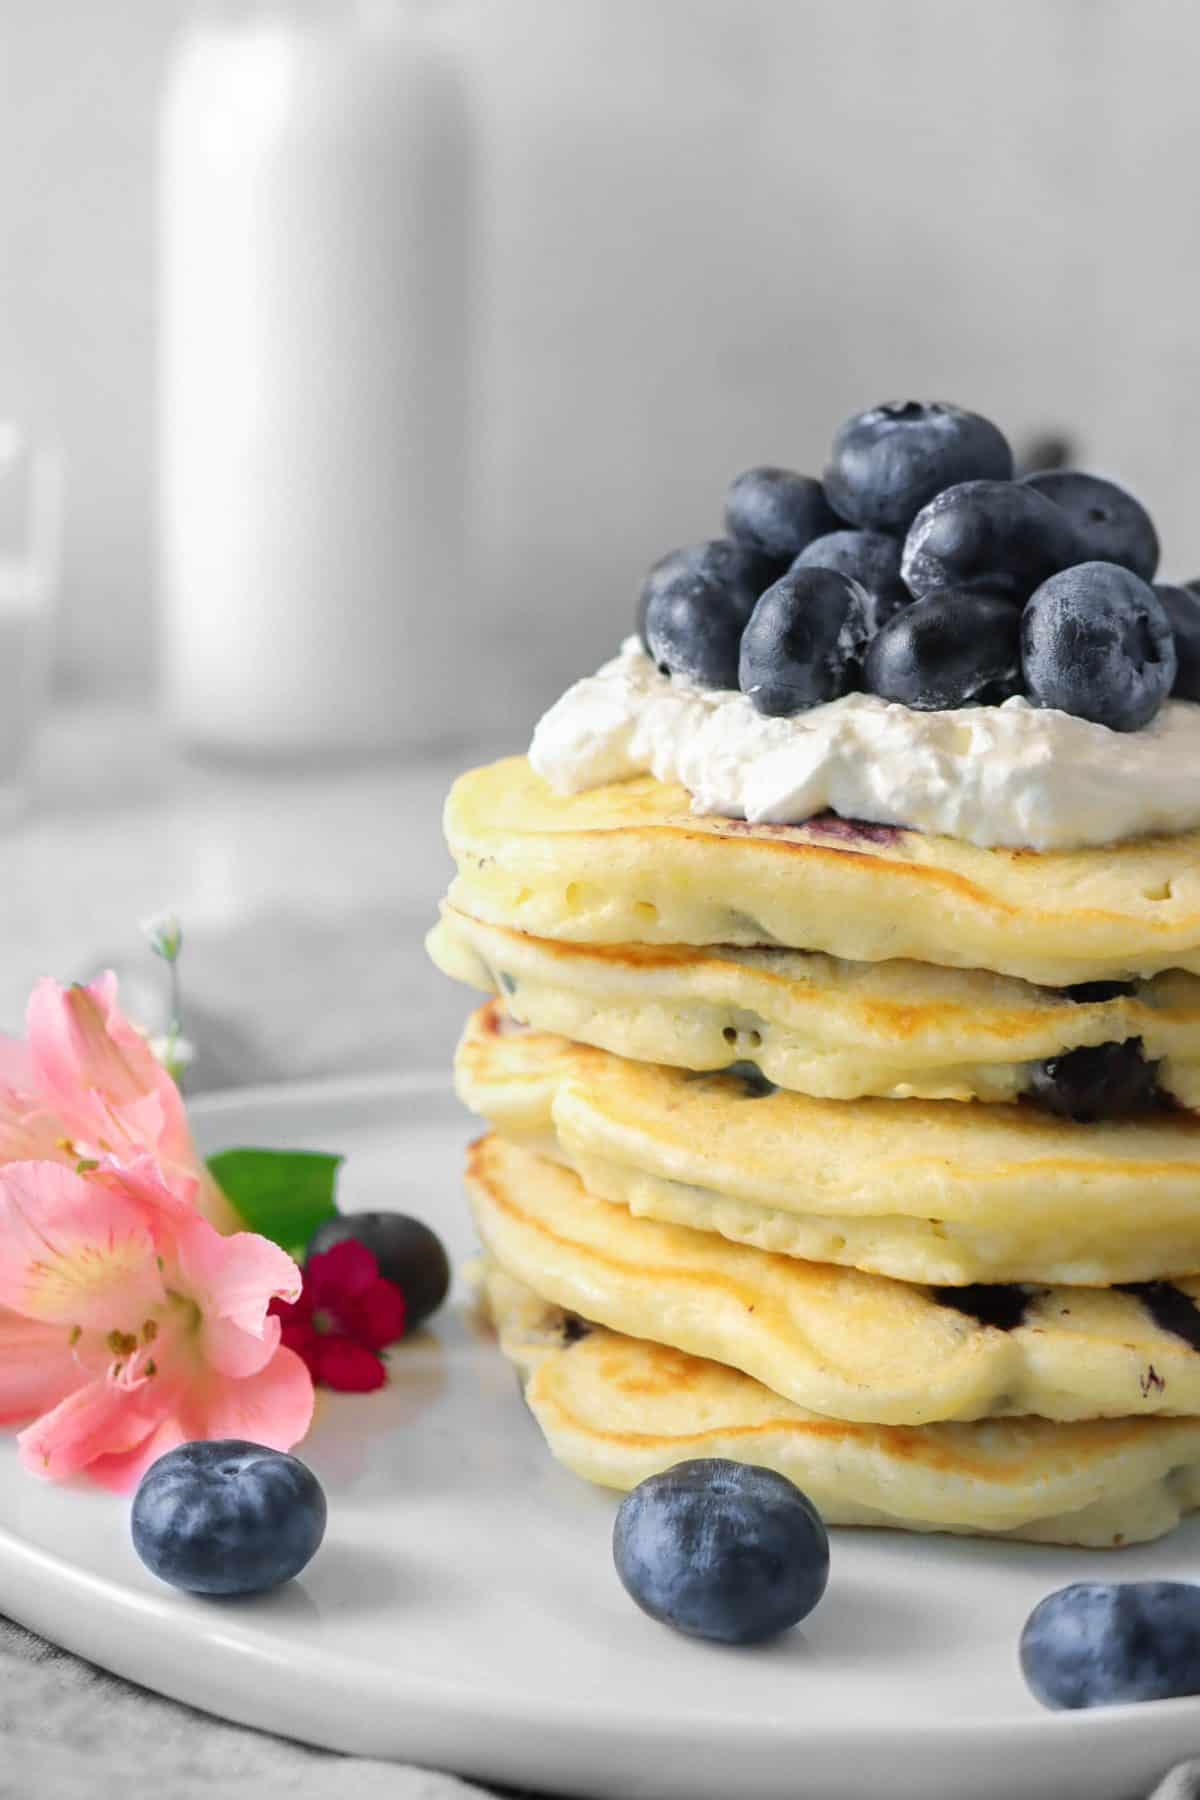 a stack of blueberry pancakes with whipped cream, fresh blueberries, and flowers on a white plate with a jar of milk in the background